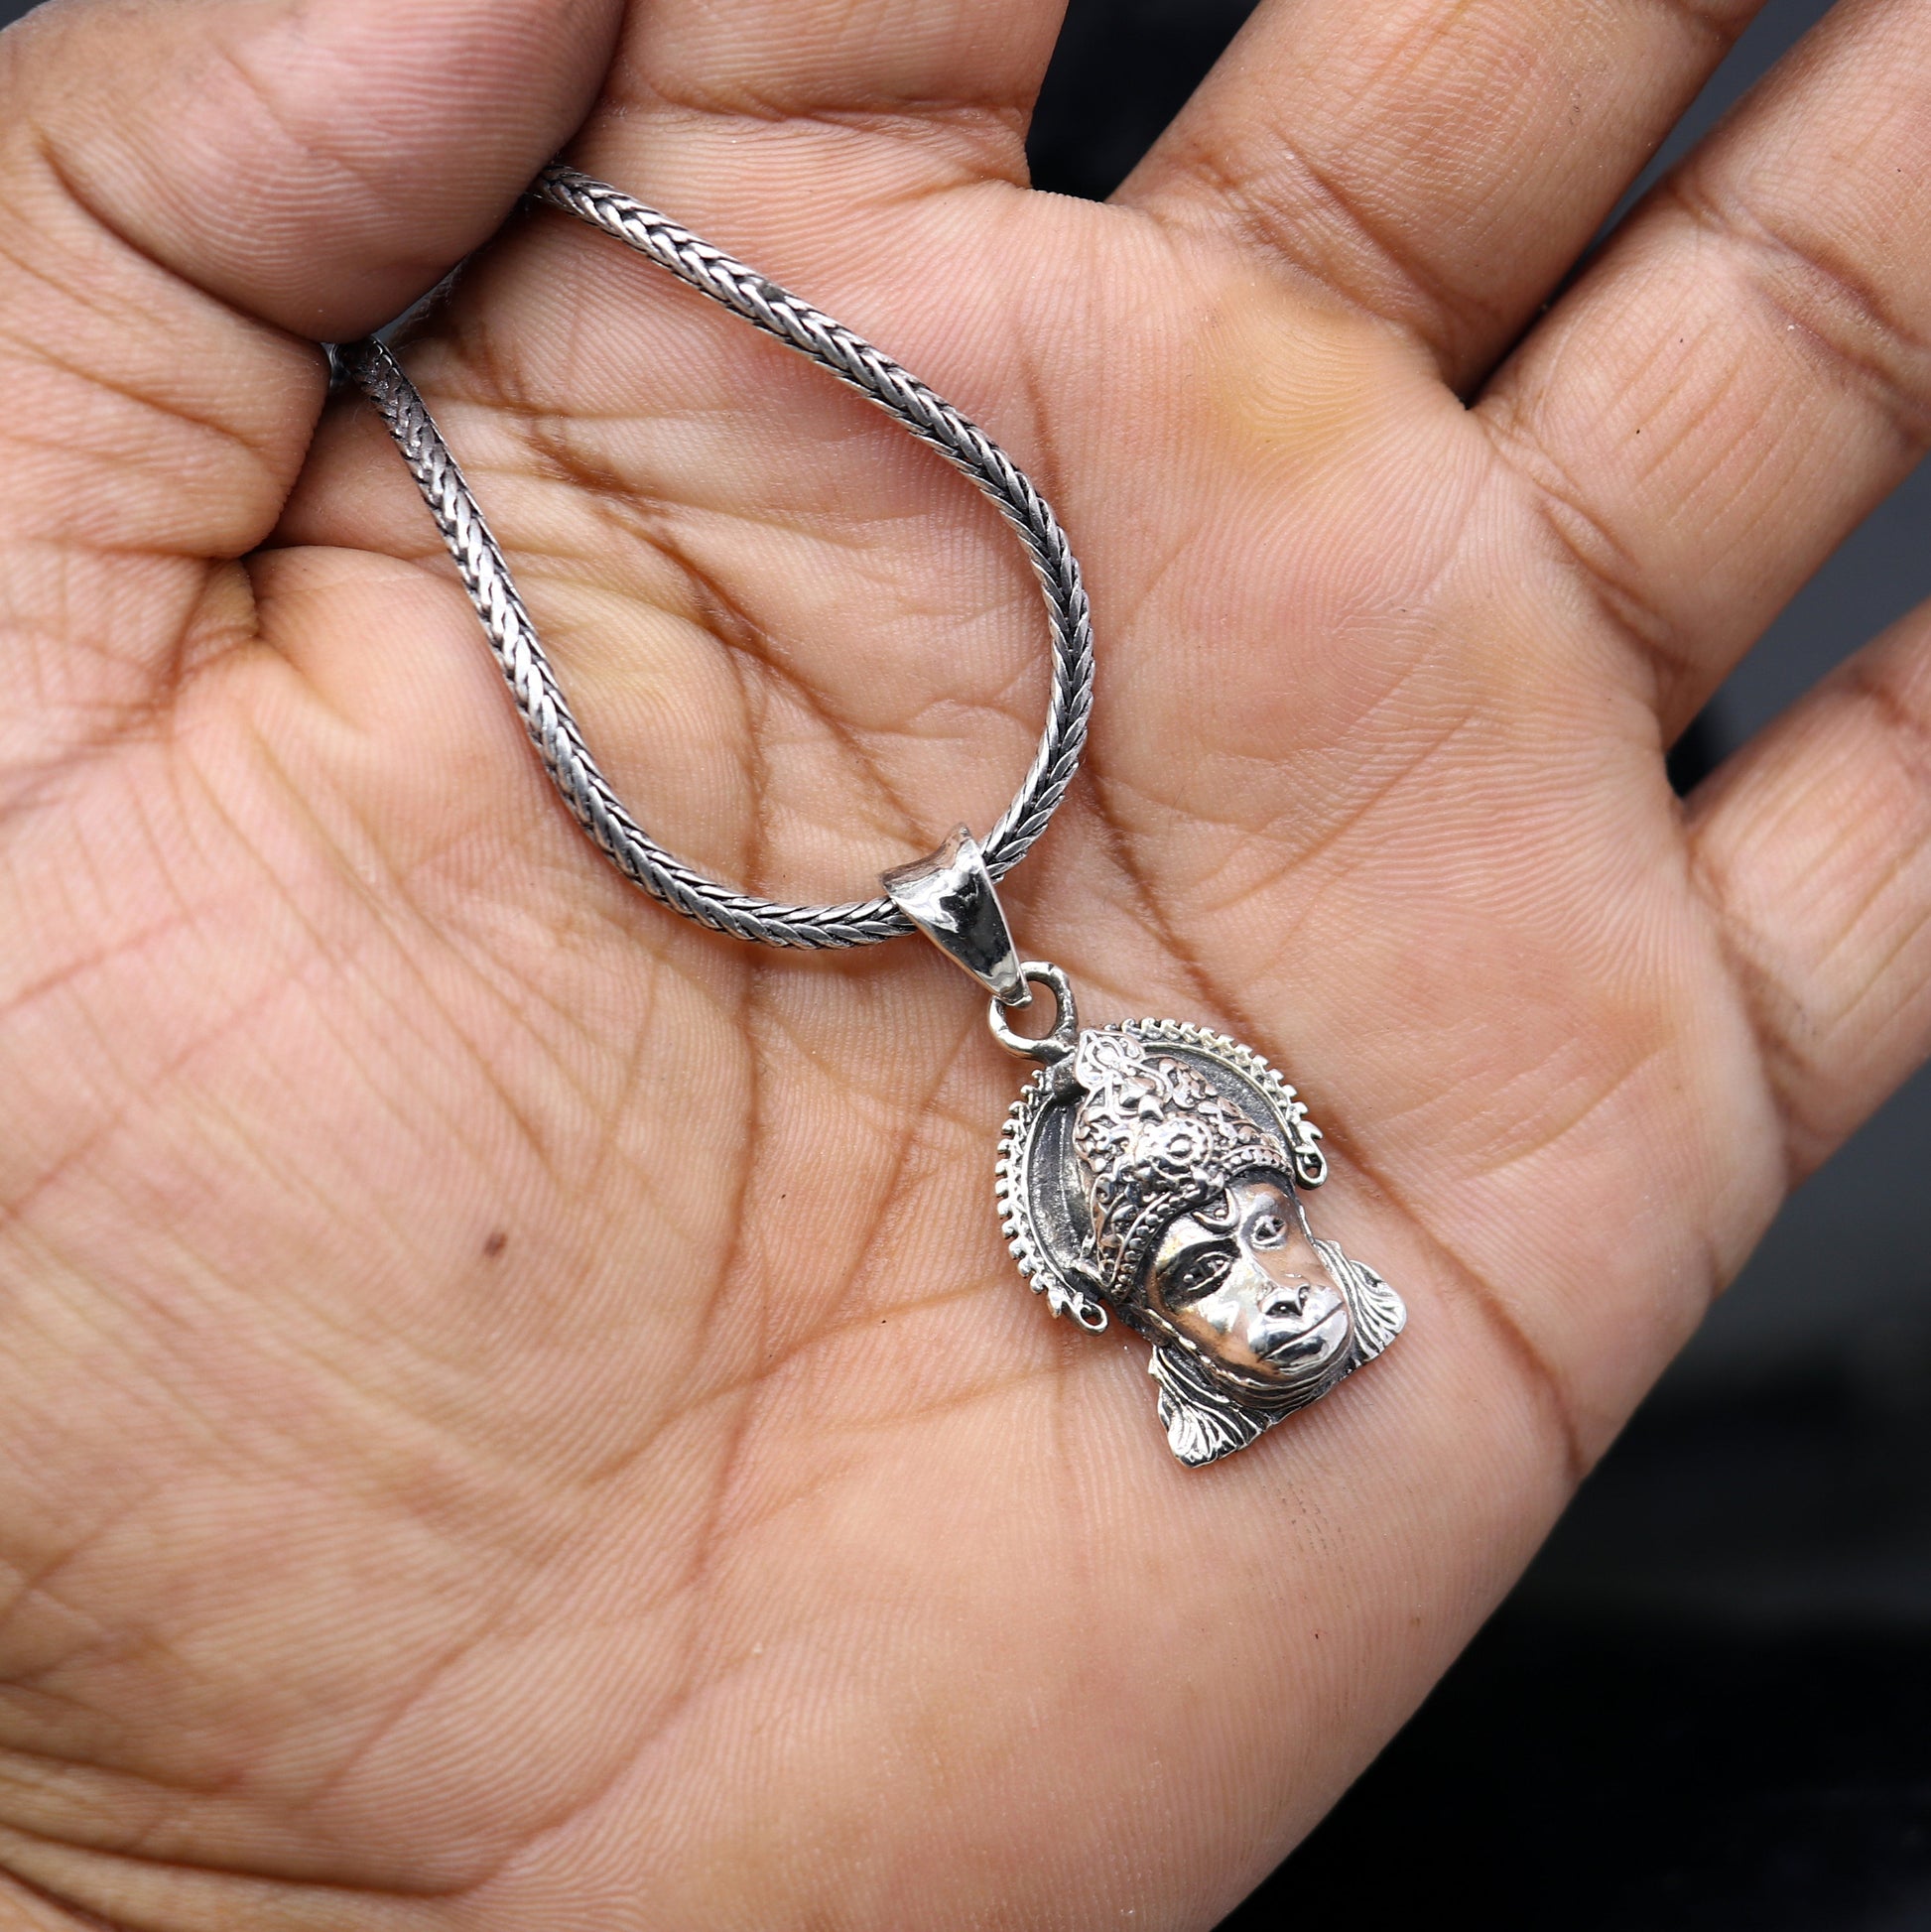 Divine 925 sterling silver trendy lord hanuman face pendant daily use pendant best delicate kavacham jewelry NSP678 - TRIBAL ORNAMENTS